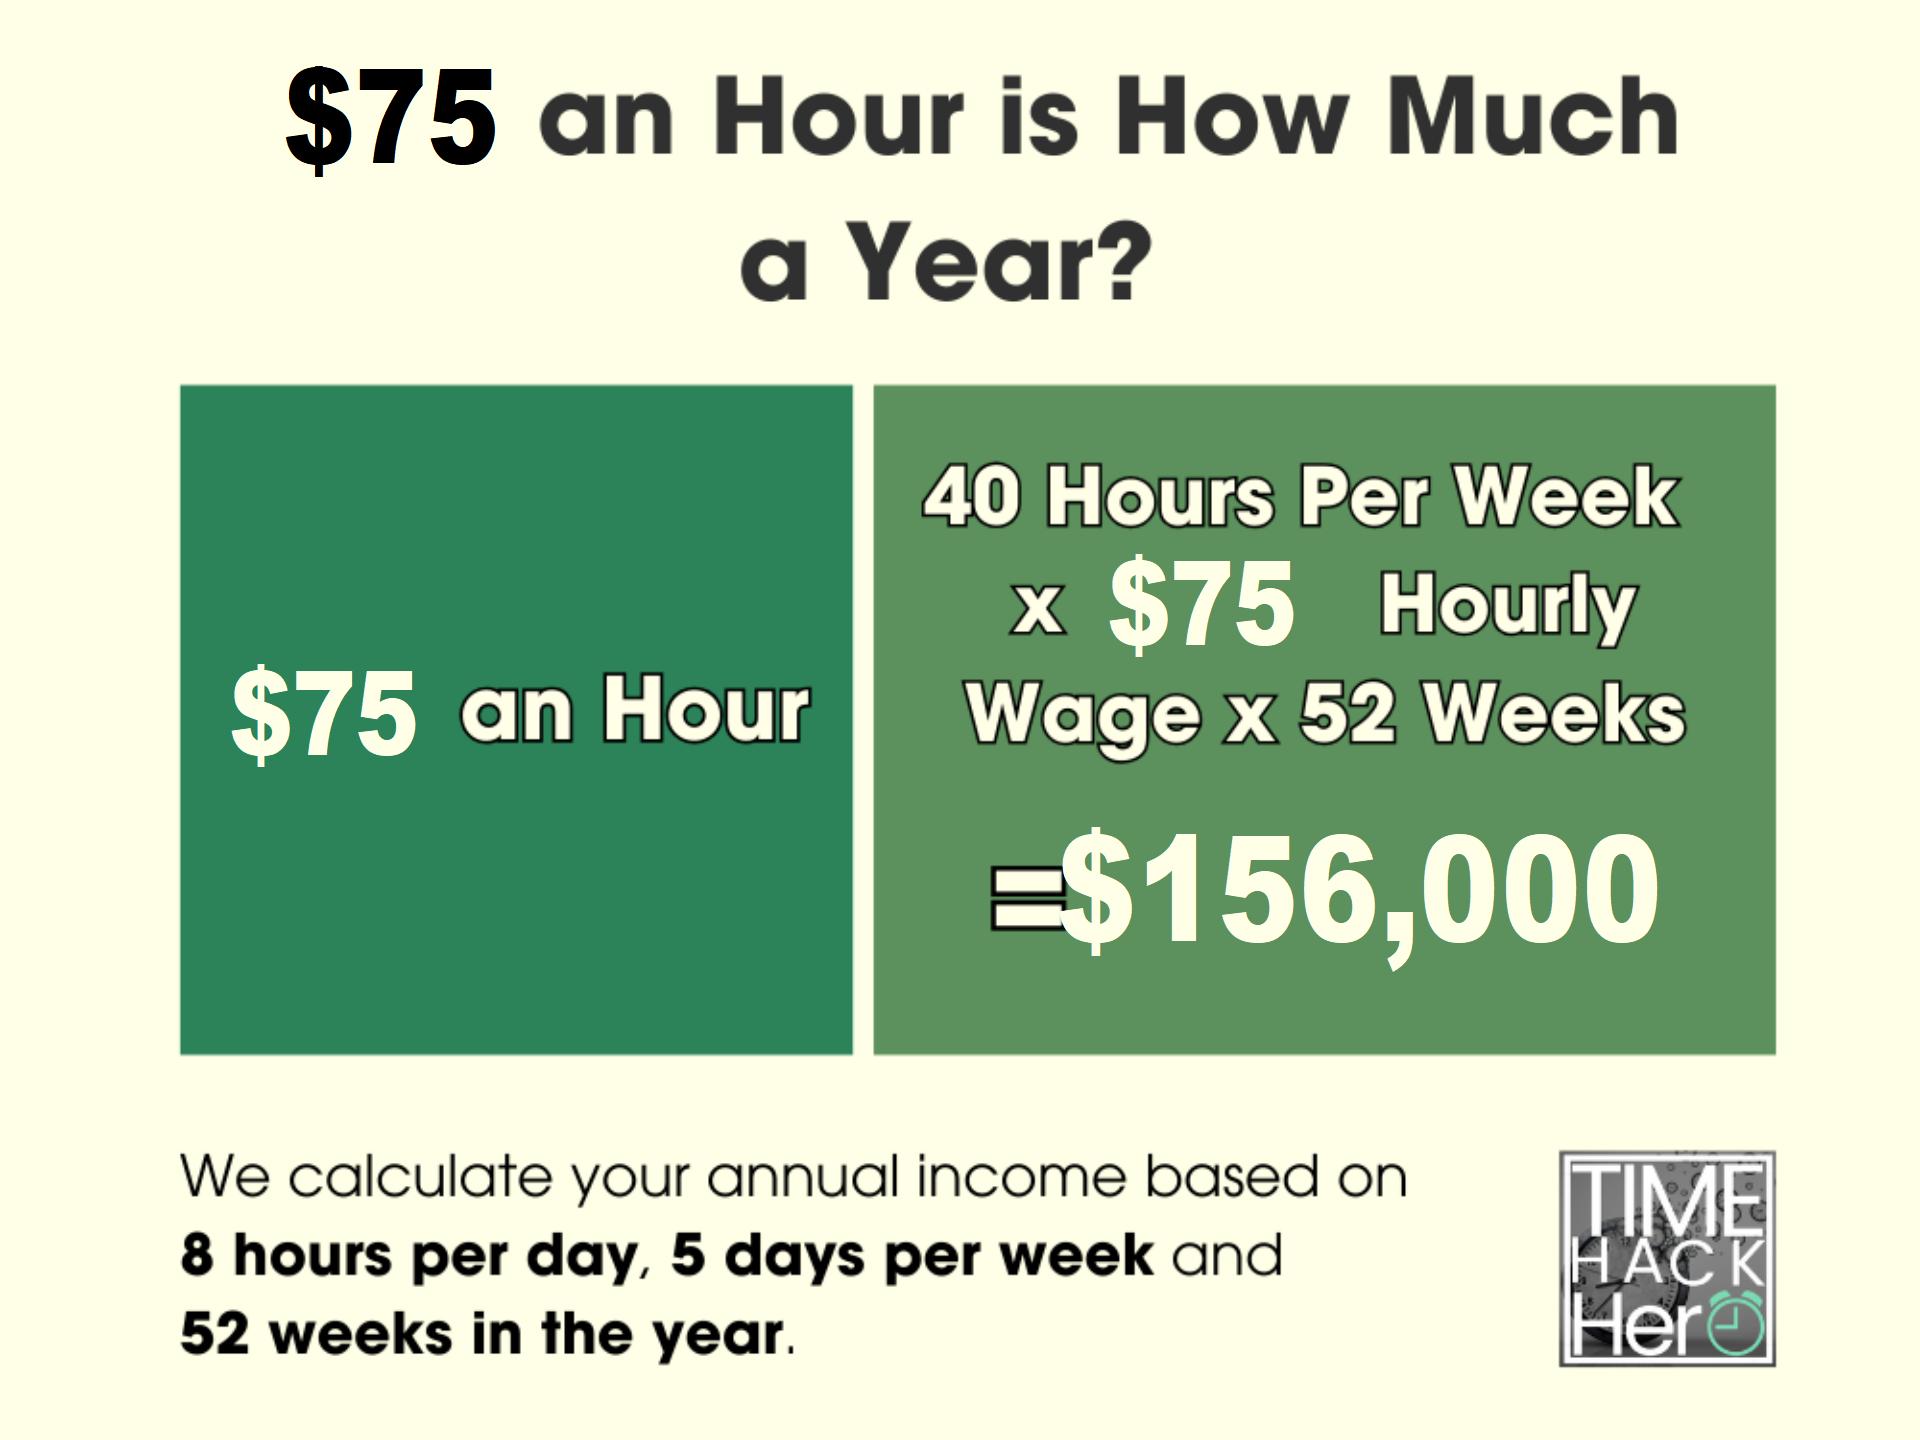 $75 an Hour is How Much a Year